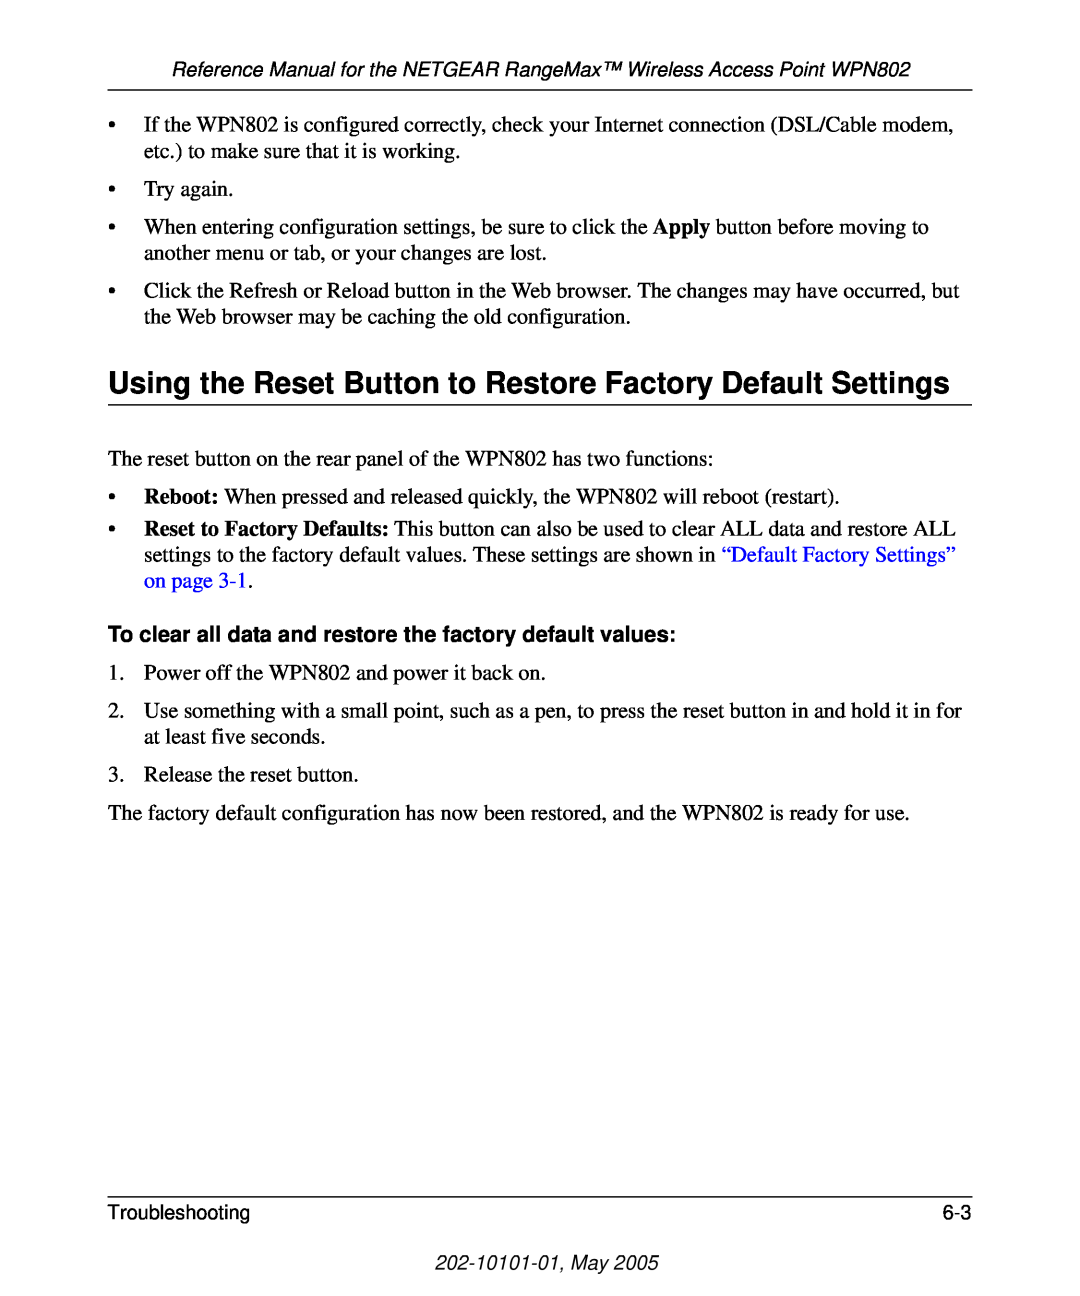 NETGEAR WPN802 manual Using the Reset Button to Restore Factory Default Settings 